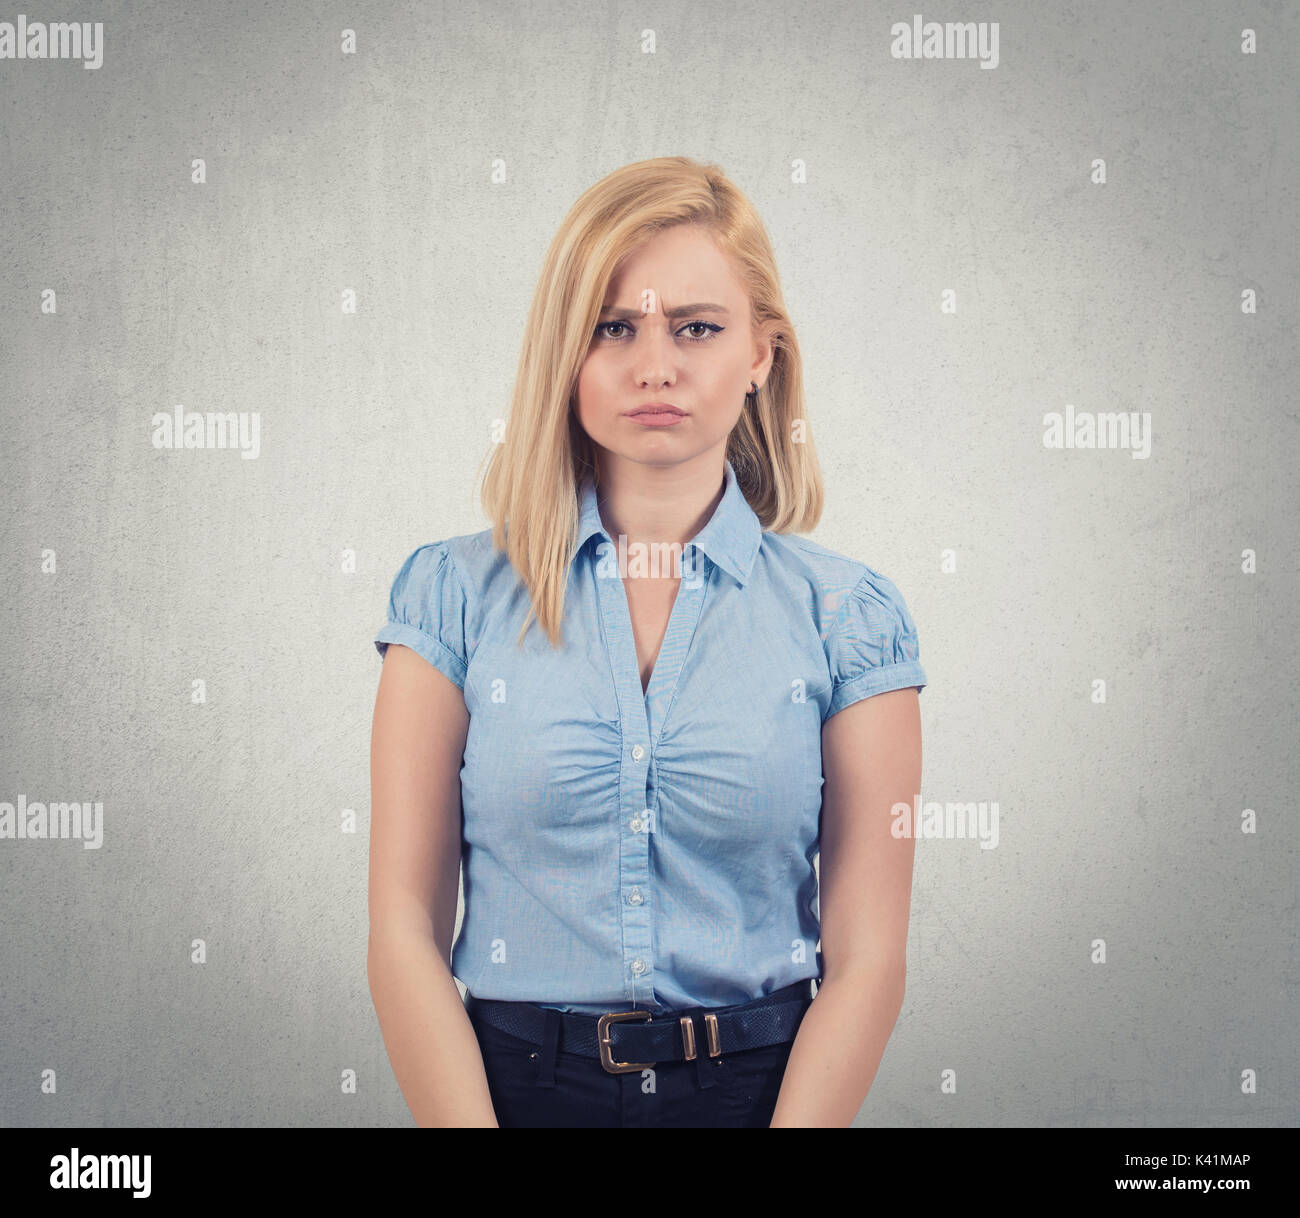 Closeup portrait angry, offended, unhappy young woman,isolated dark grey background. Negative human emotions, facial expressions, feelings, attitude, reaction Stock Photo